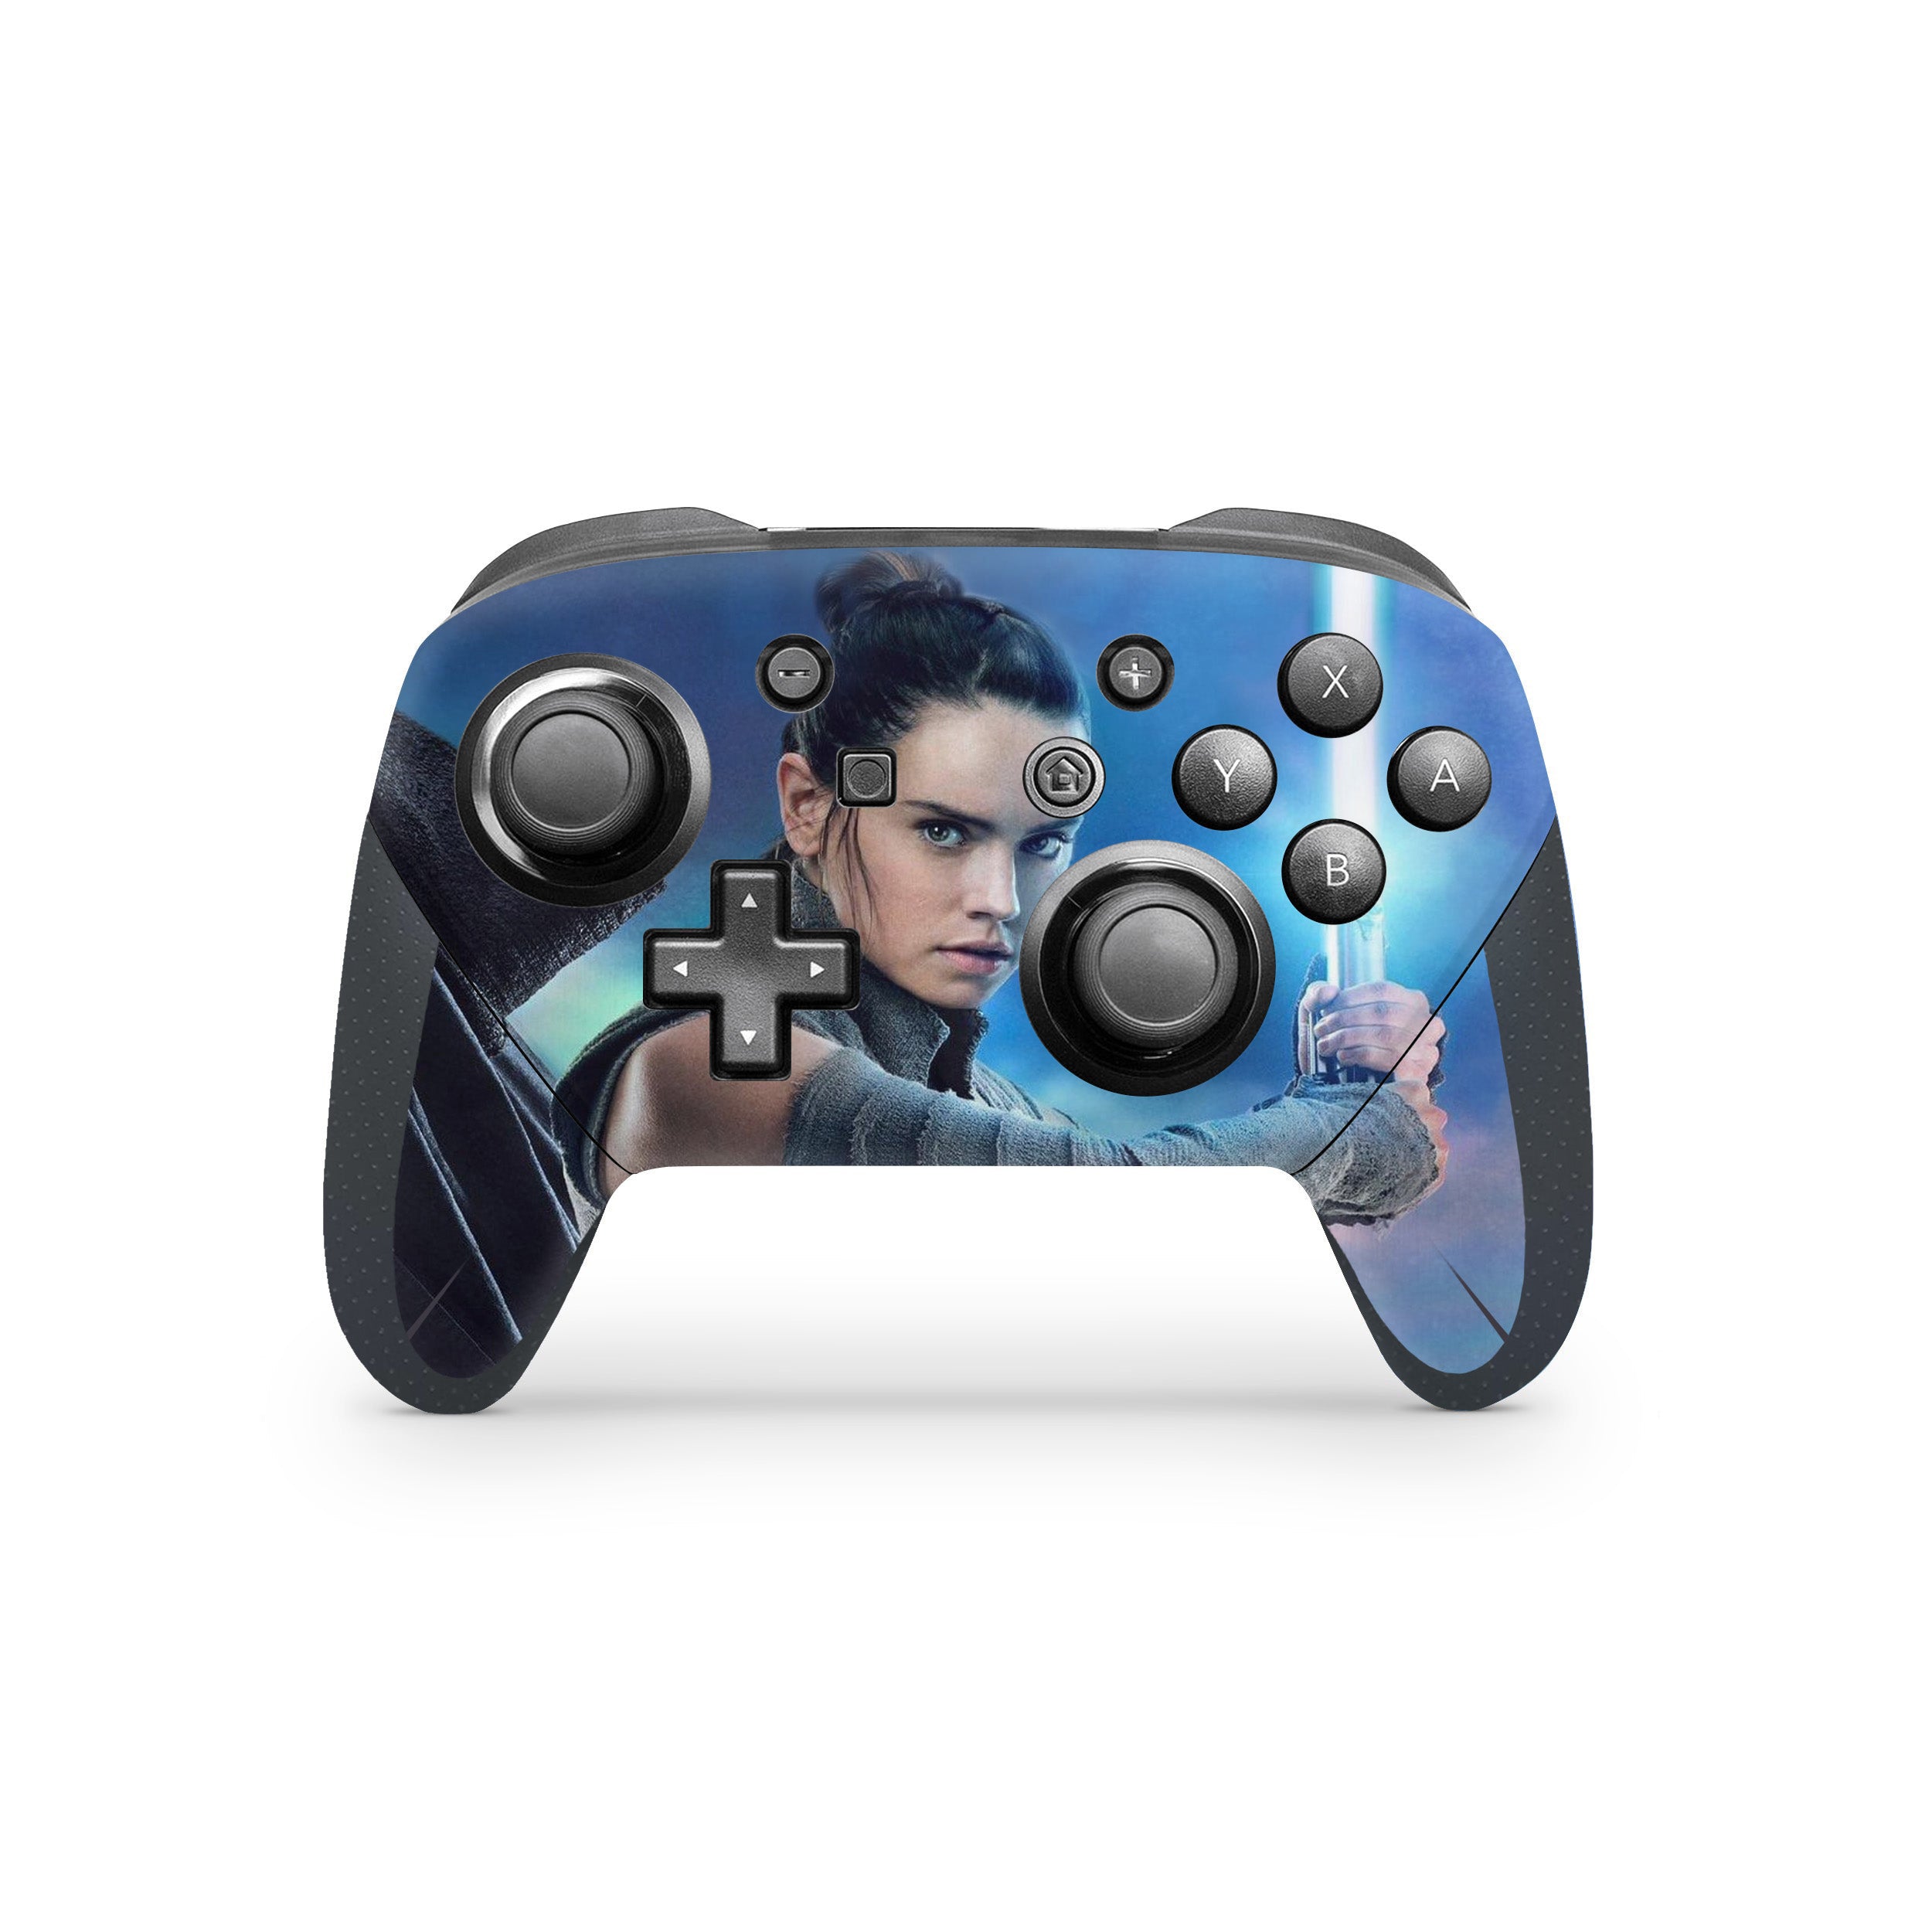 A video game skin featuring a Star Wars Luke Skywalker design for the Switch Pro Controller.